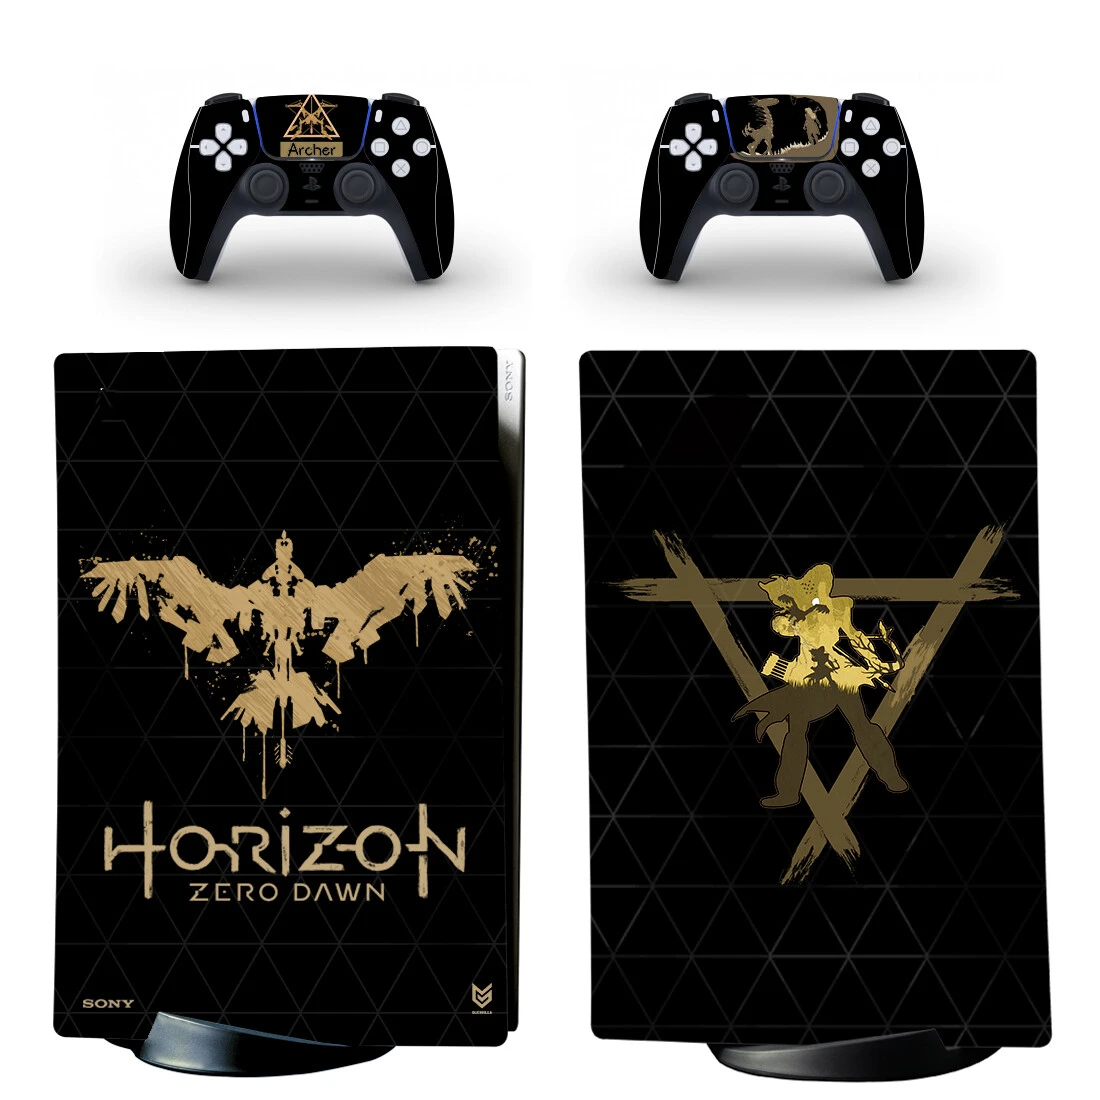 Horizon Zero Dawn PS5 Digital Skin Sticker Decal Cover for Playstation 5 Console & 2 Controllers Vinyl Skins